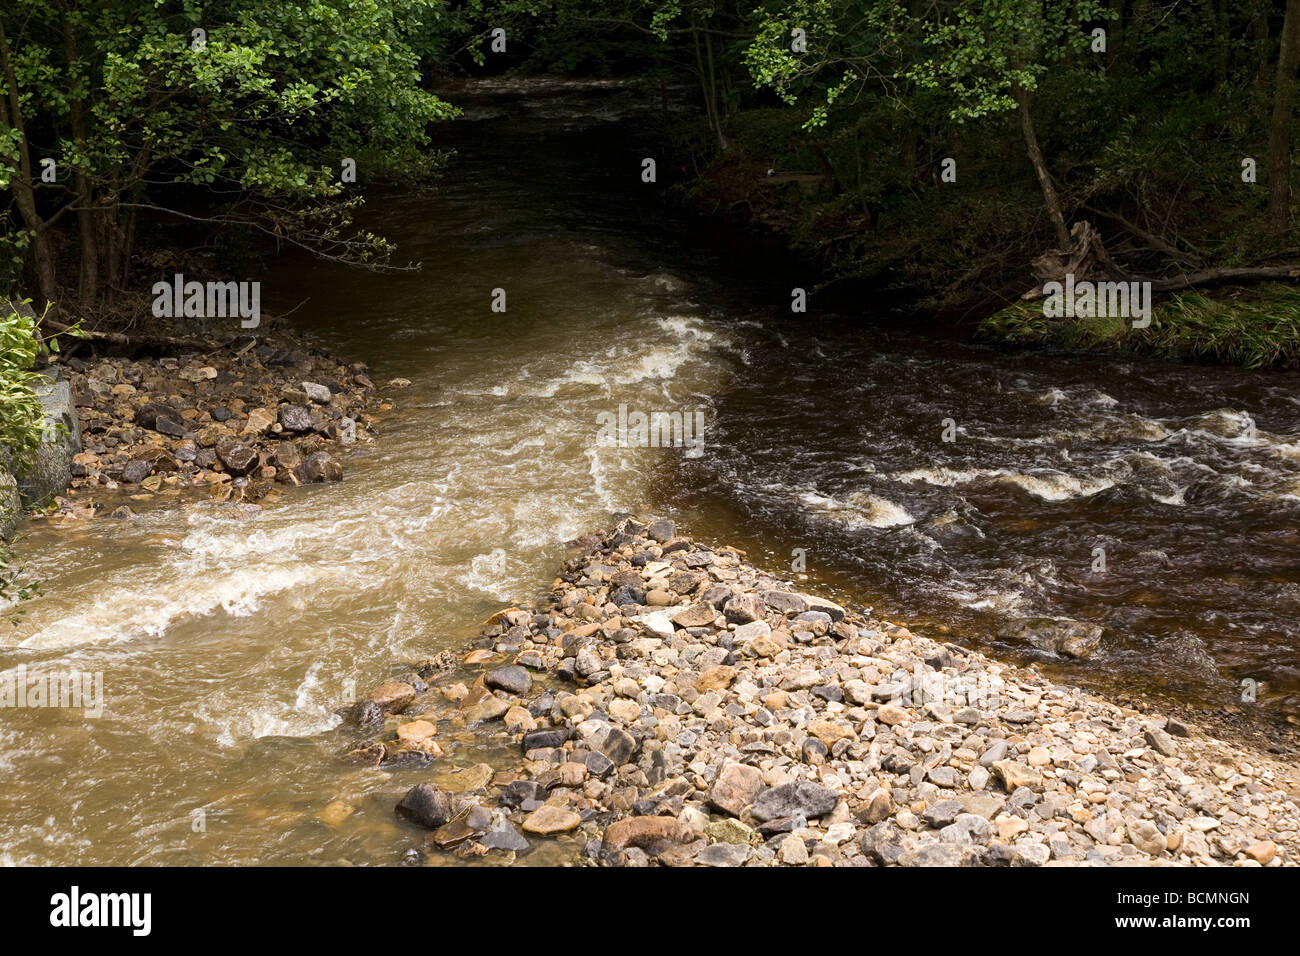 Streams (known as burns) of two different colours flow and merge together within Hamsterley Forest in County Durham, England. Stock Photo